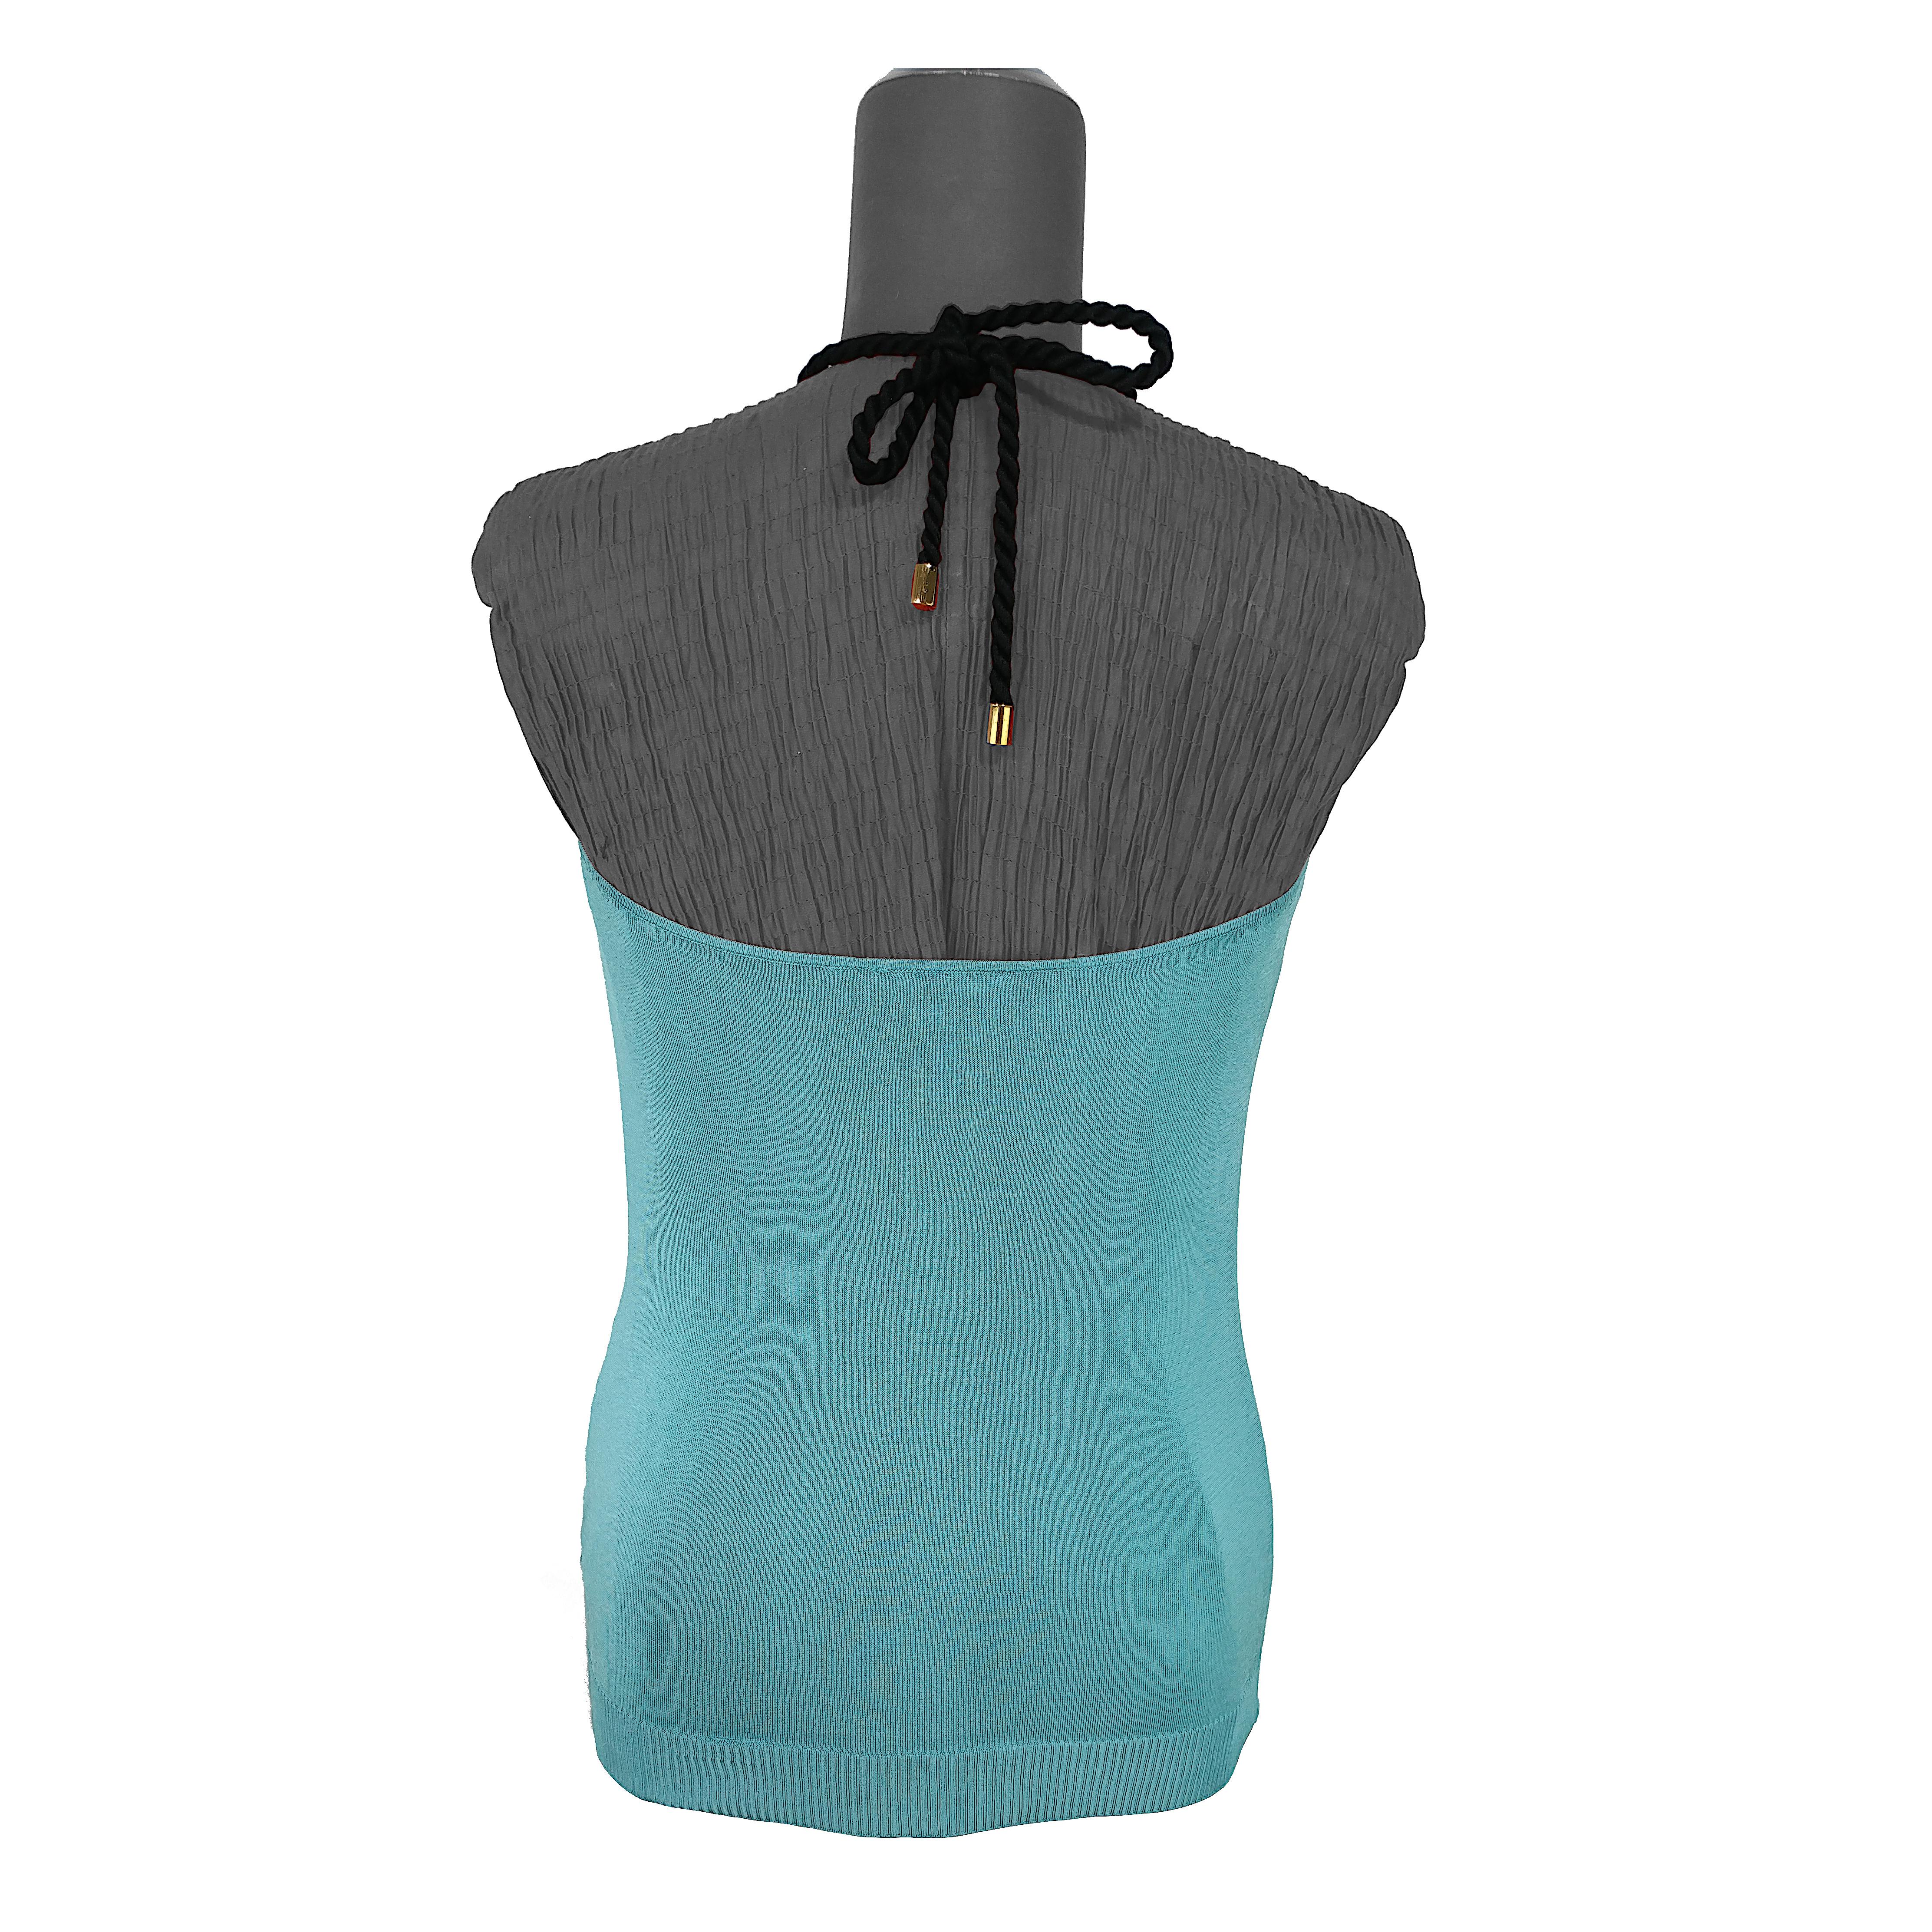 An outstanding Gucci vintage item designed by Frida Giannini in 2008, this halter top in a beatiful turquoise color features a black rope finished with logoed golden clips and a keyhole neckline embellished by a green stone embedded in a golden